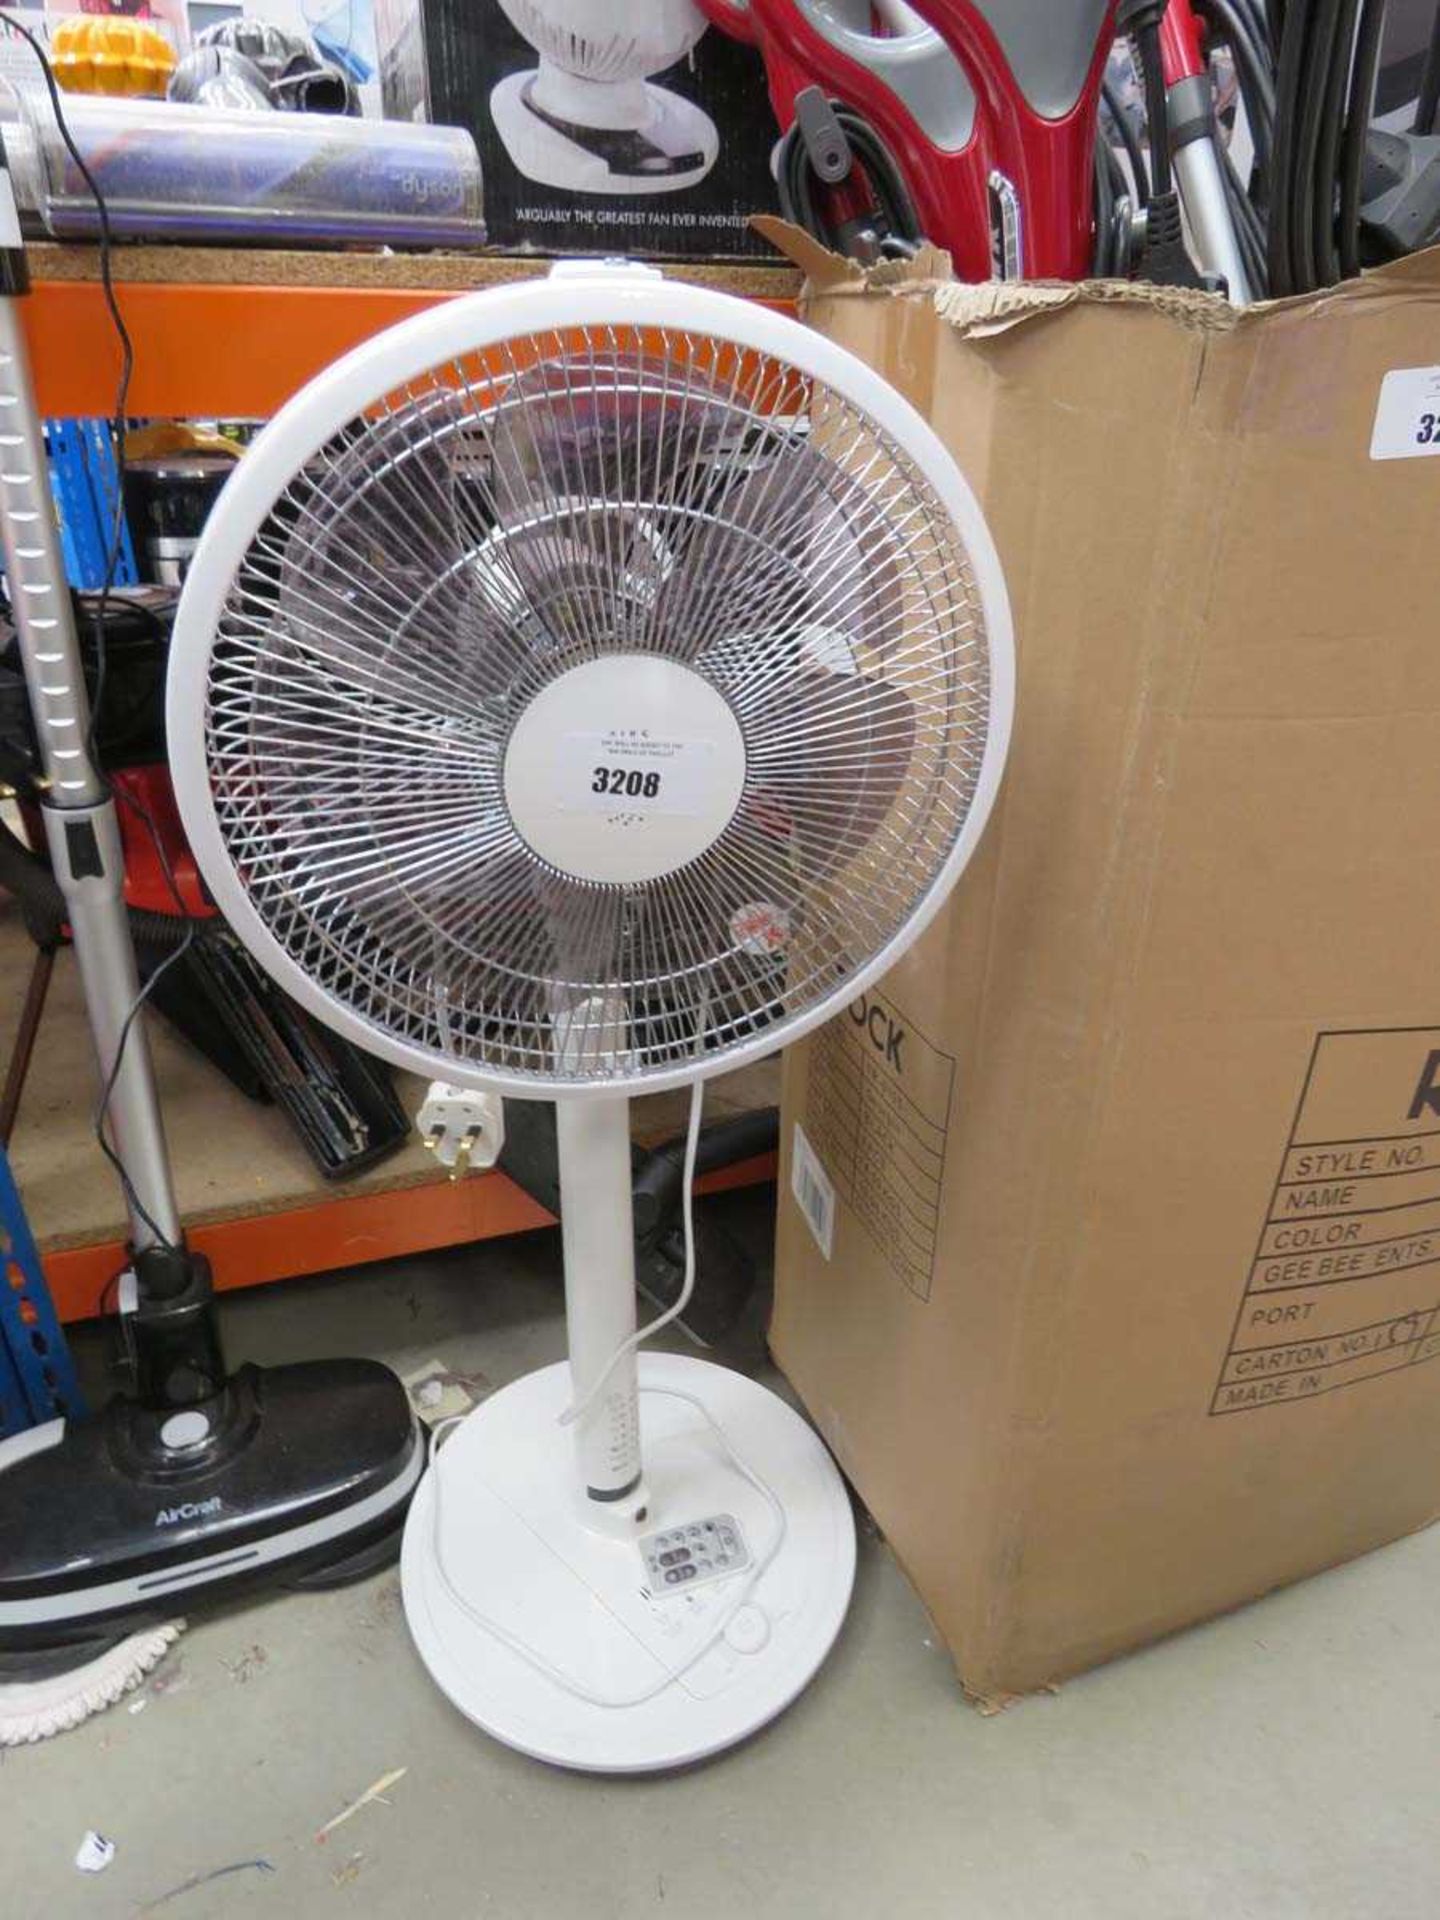 +VAT NSA pedestal fan with PSU and remote